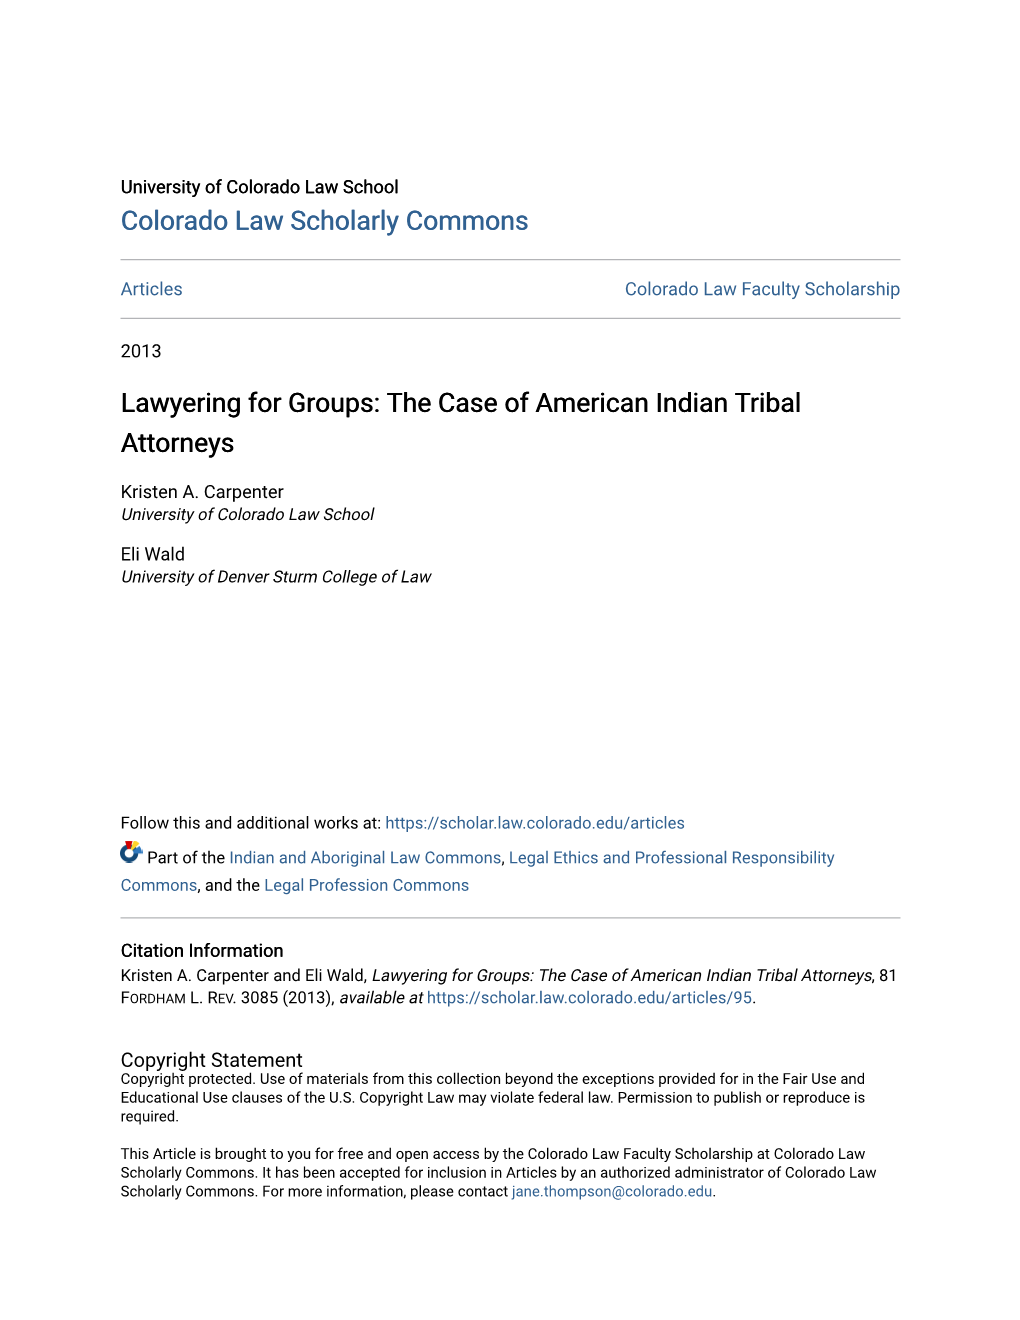 Lawyering for Groups: the Case of American Indian Tribal Attorneys